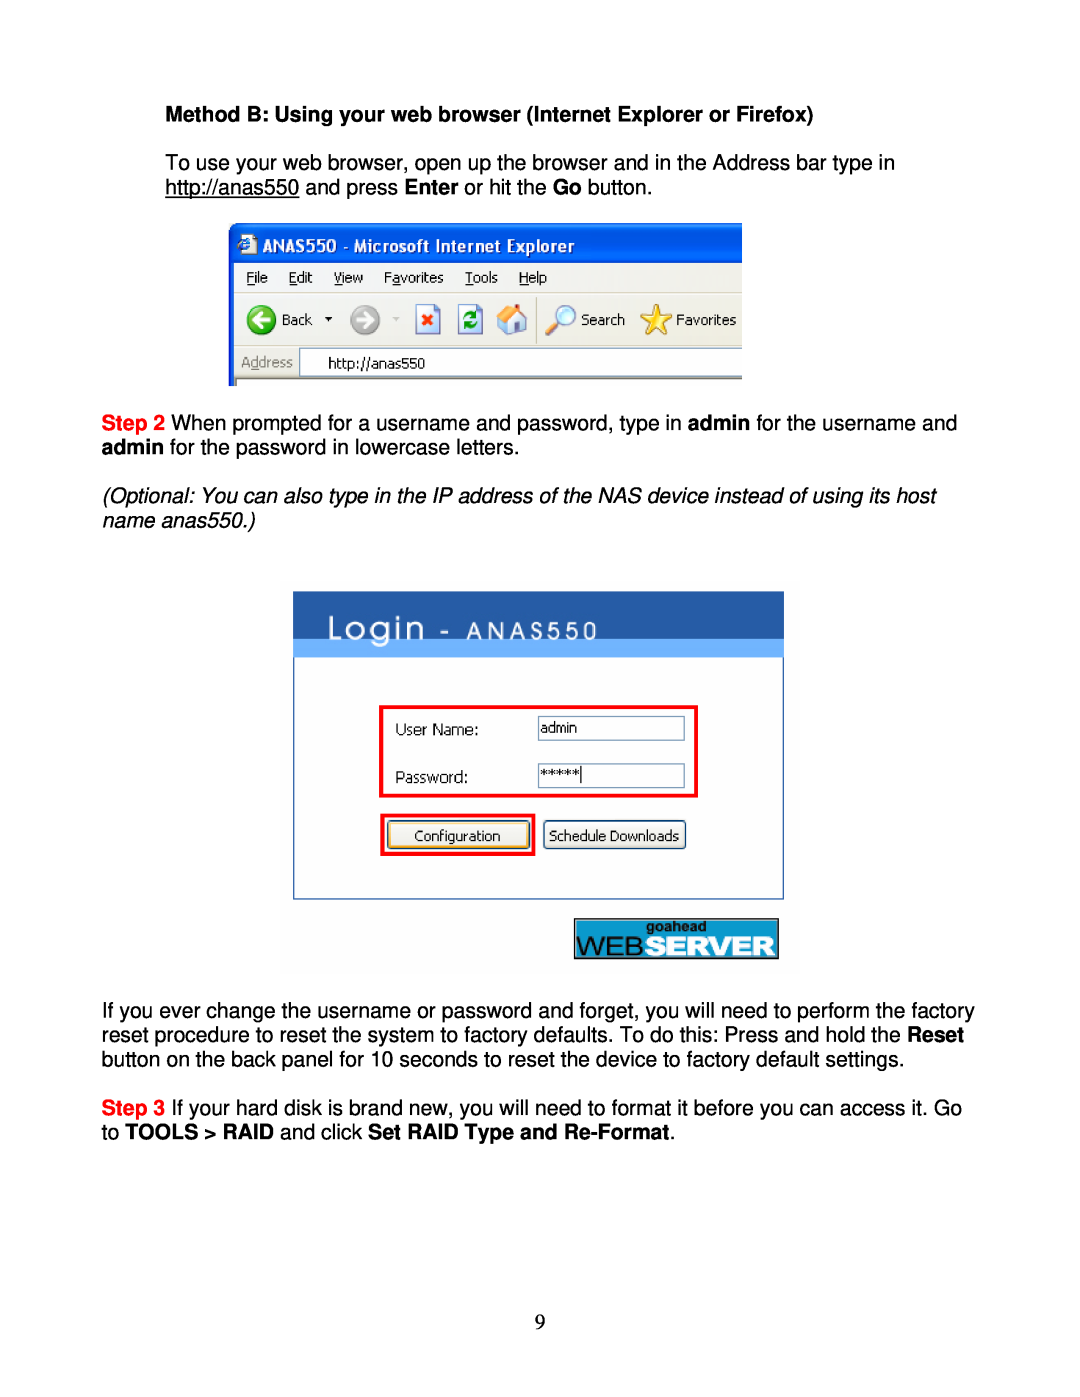 Airlink101 ANAS550 user manual Method B Using your web browser Internet Explorer or Firefox 